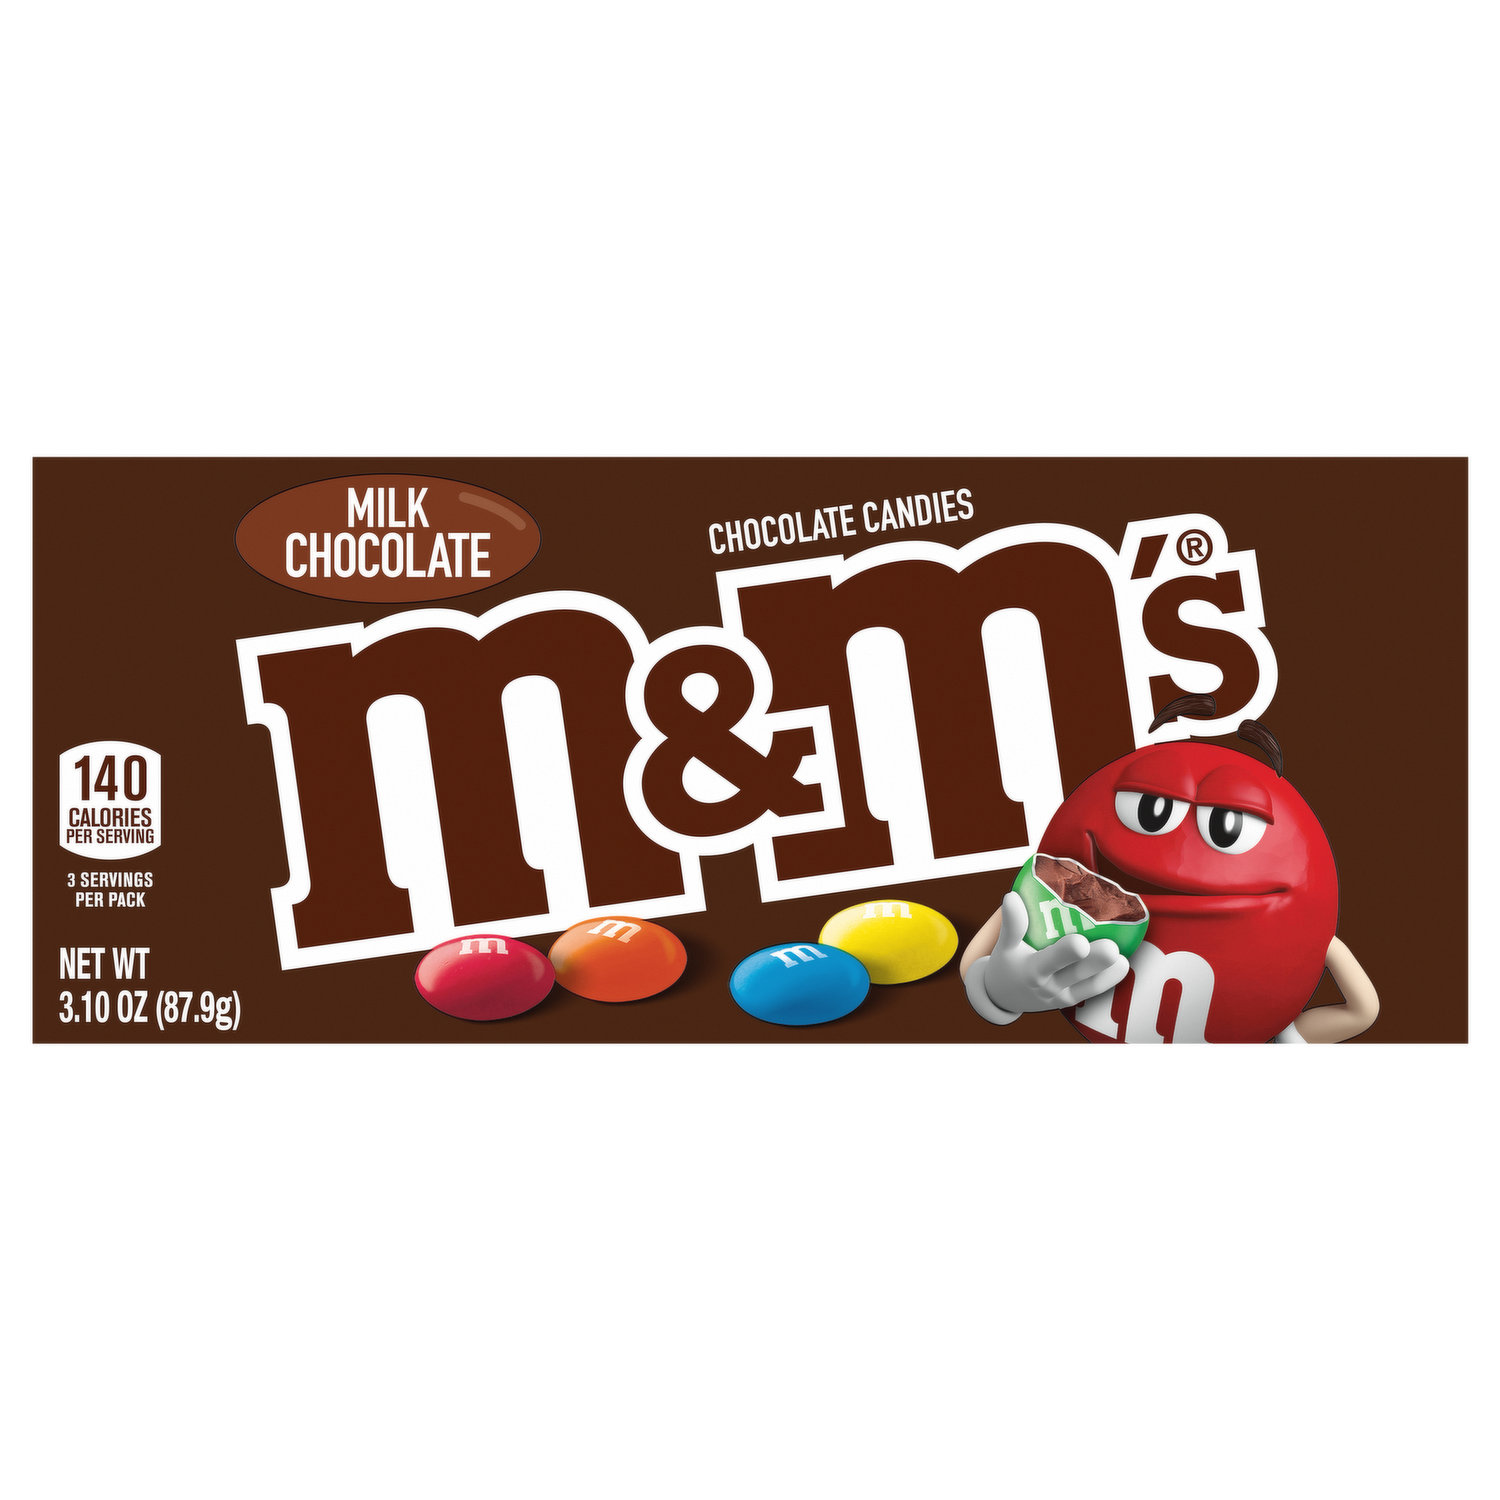 M&M's Red, White & Blue Mix Peanut Chocolate Candies 38.0 Oz, Chocolate  Candy